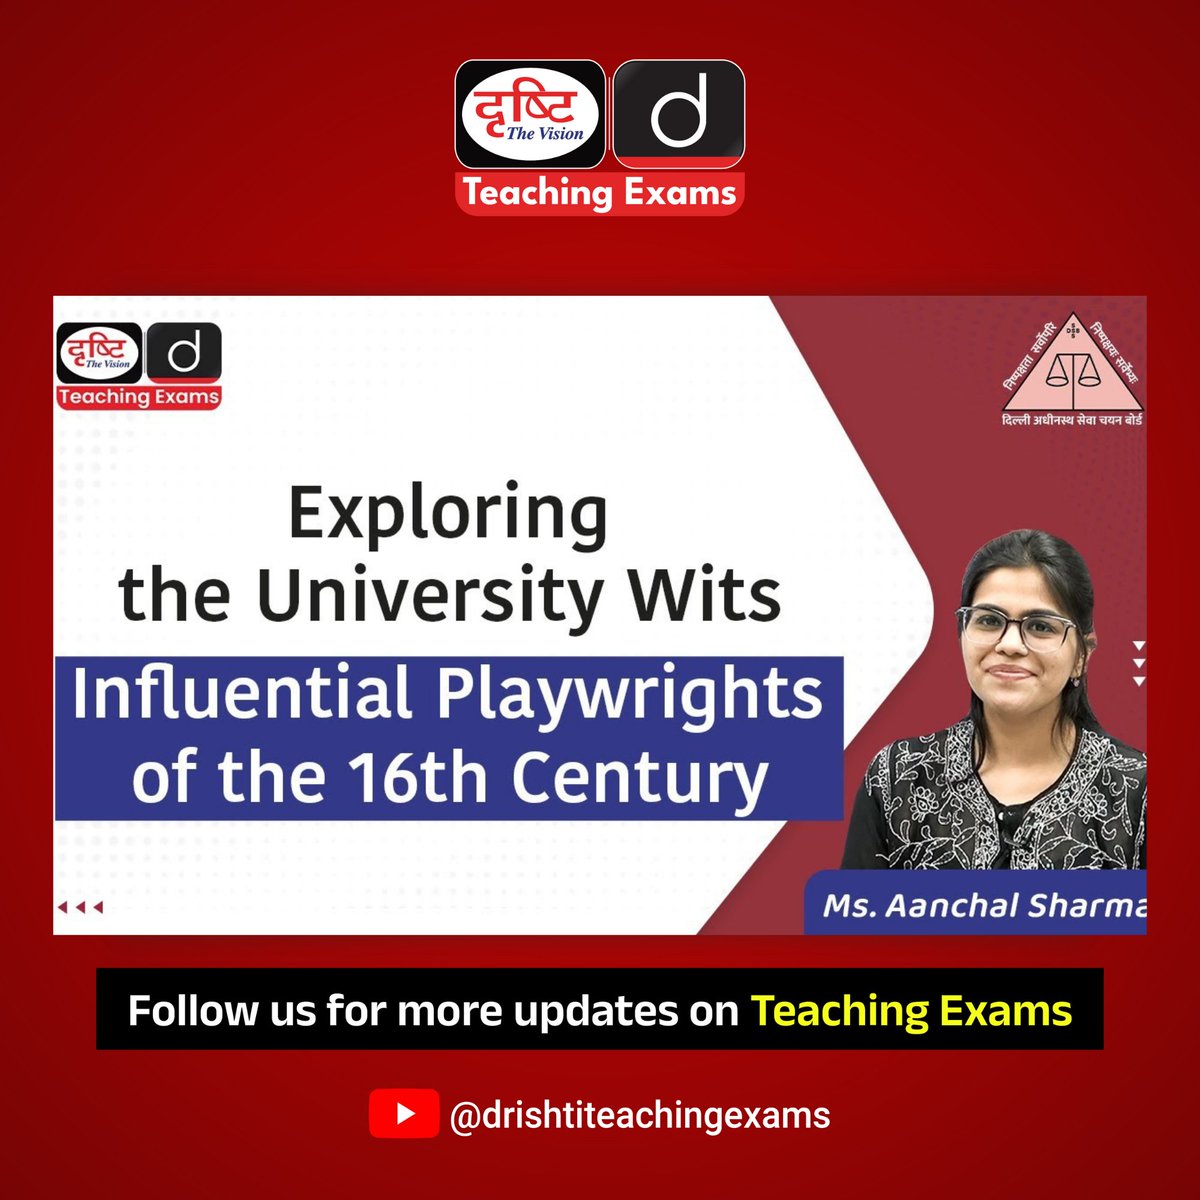 Join Ms. Aanchal Sharma as she explores the University Wits, a group of influential Elizabethan playwrights and poets who shaped English drama.
Watch the video youtu.be/AZ7E4uT2z4o?si…
#Teaching #CTET #Teacher #NTA #UGC #DSSSB #BEd #NET #Teachers #TeamDrishti #DrishtiTeachingExams